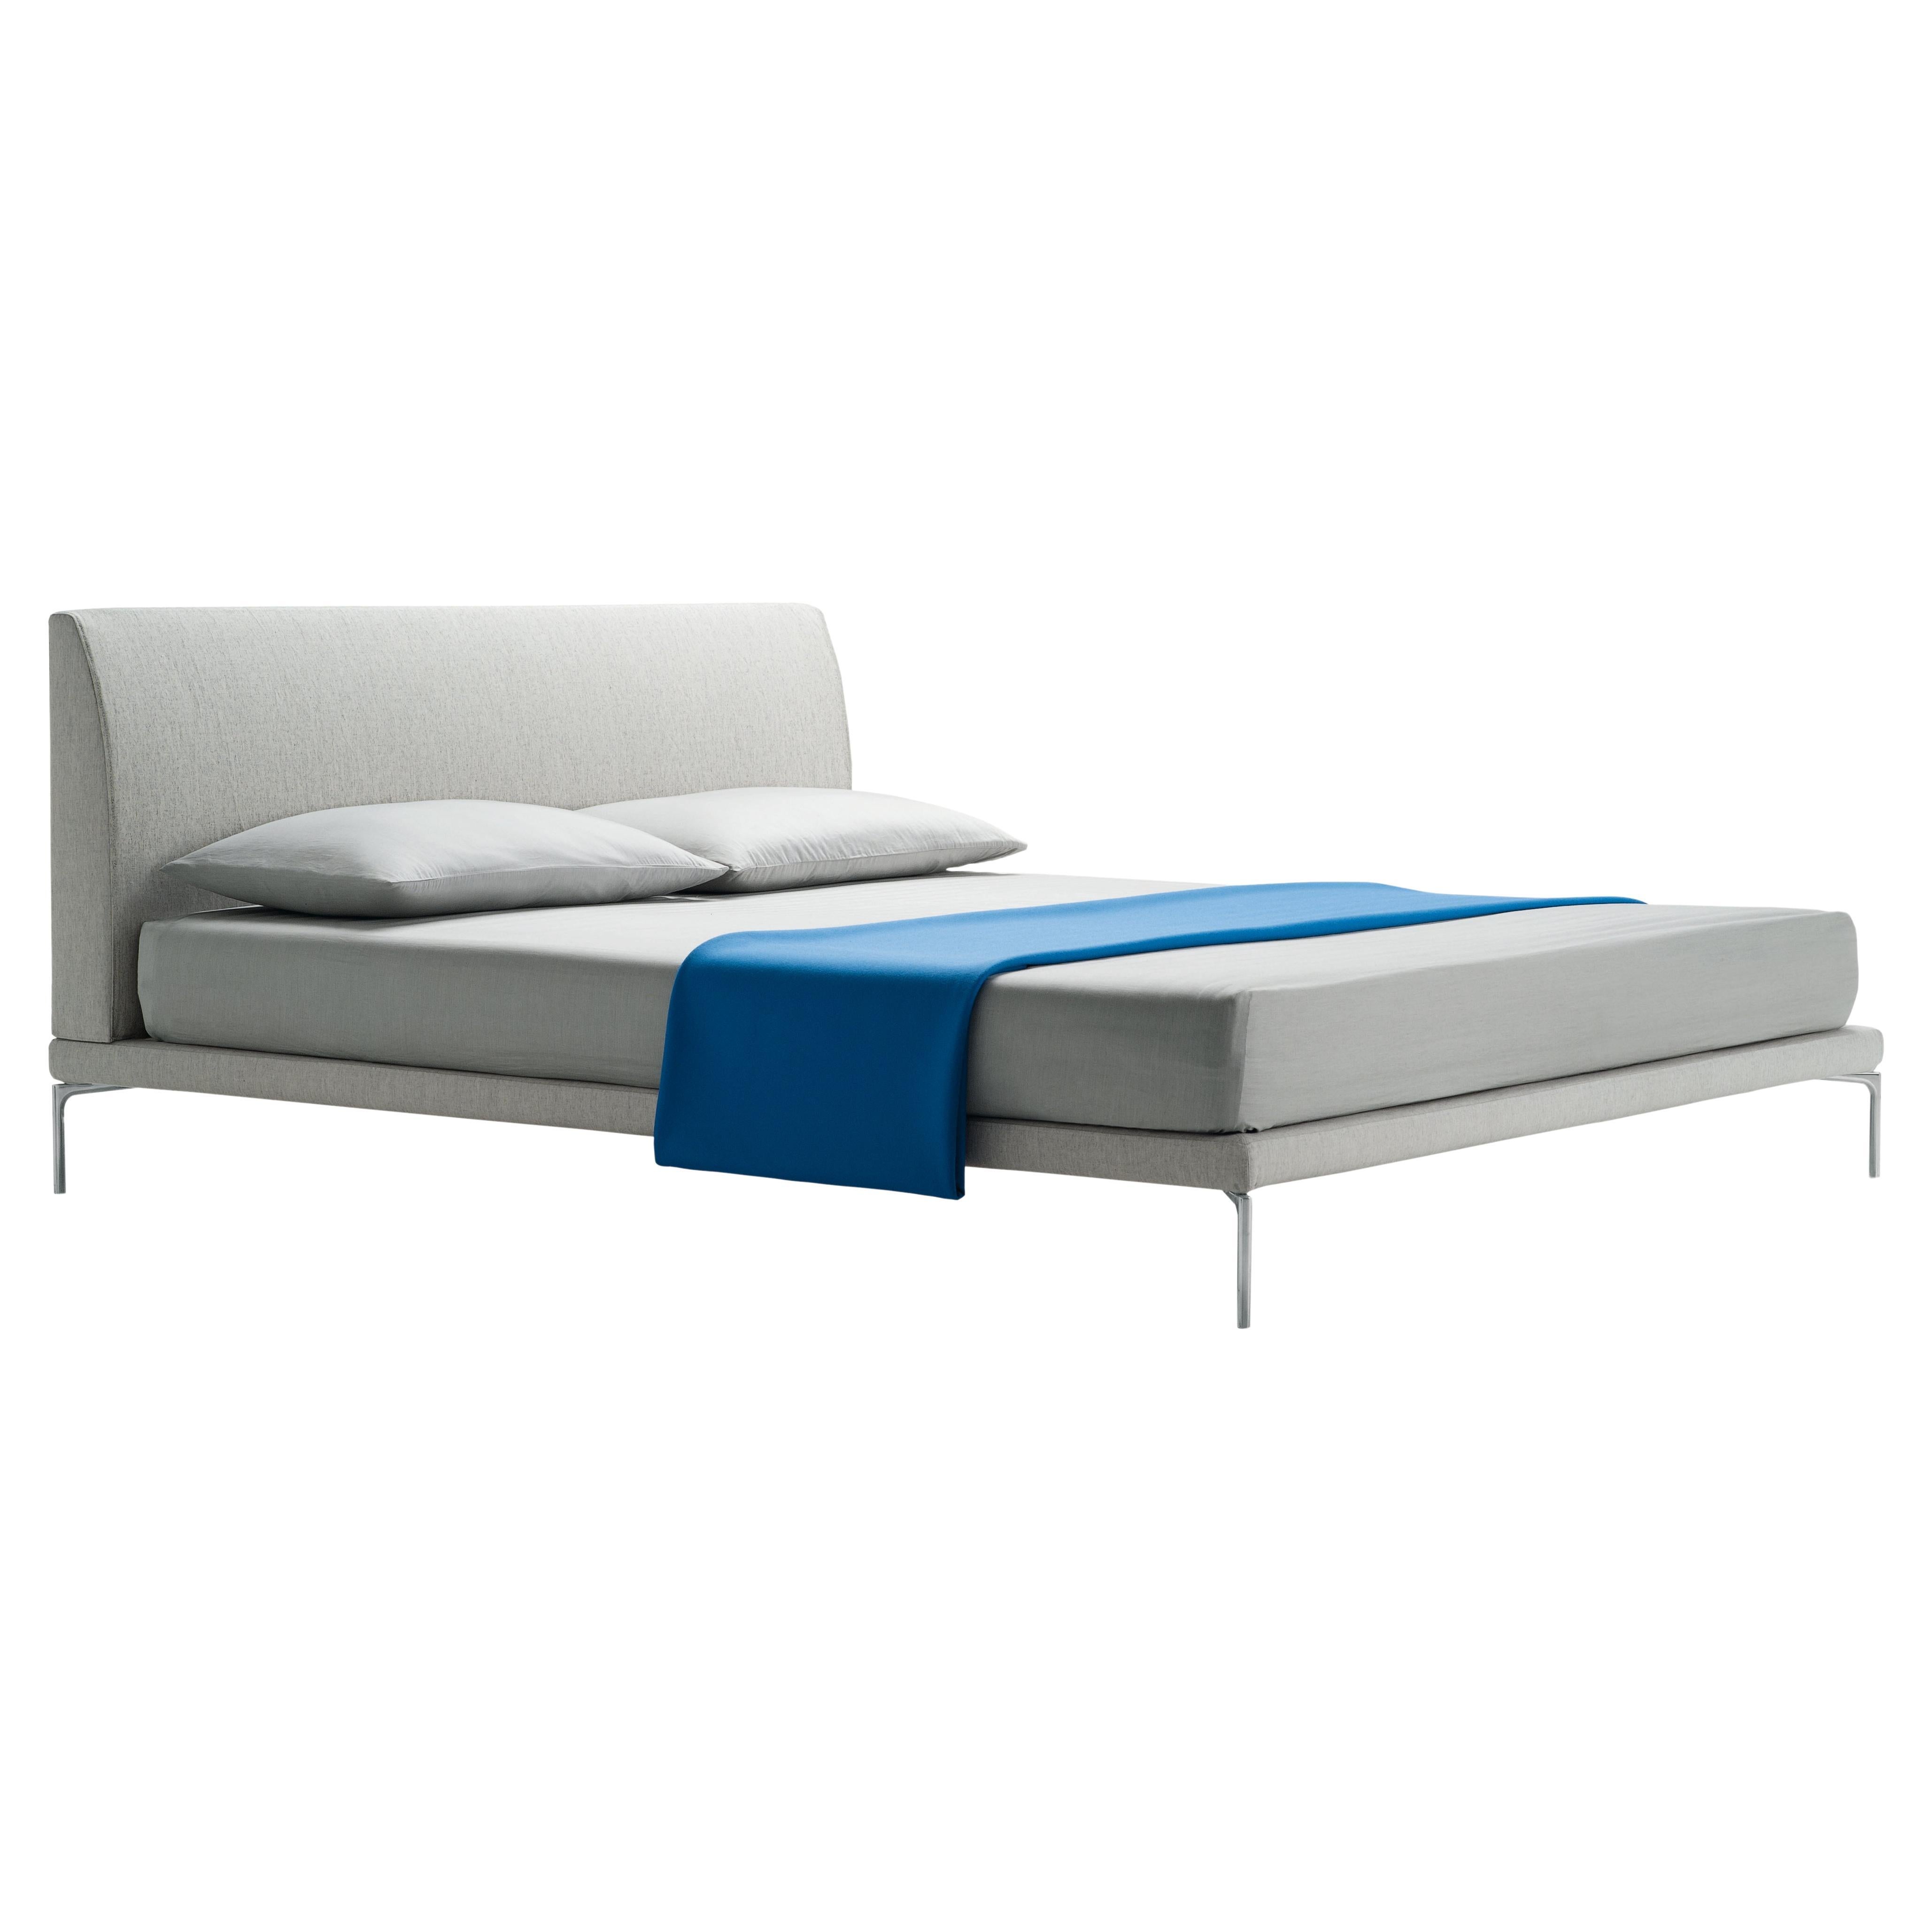 Zanotta Queen Size Talamo Bed with Separate Springings in Grey Upholstery For Sale